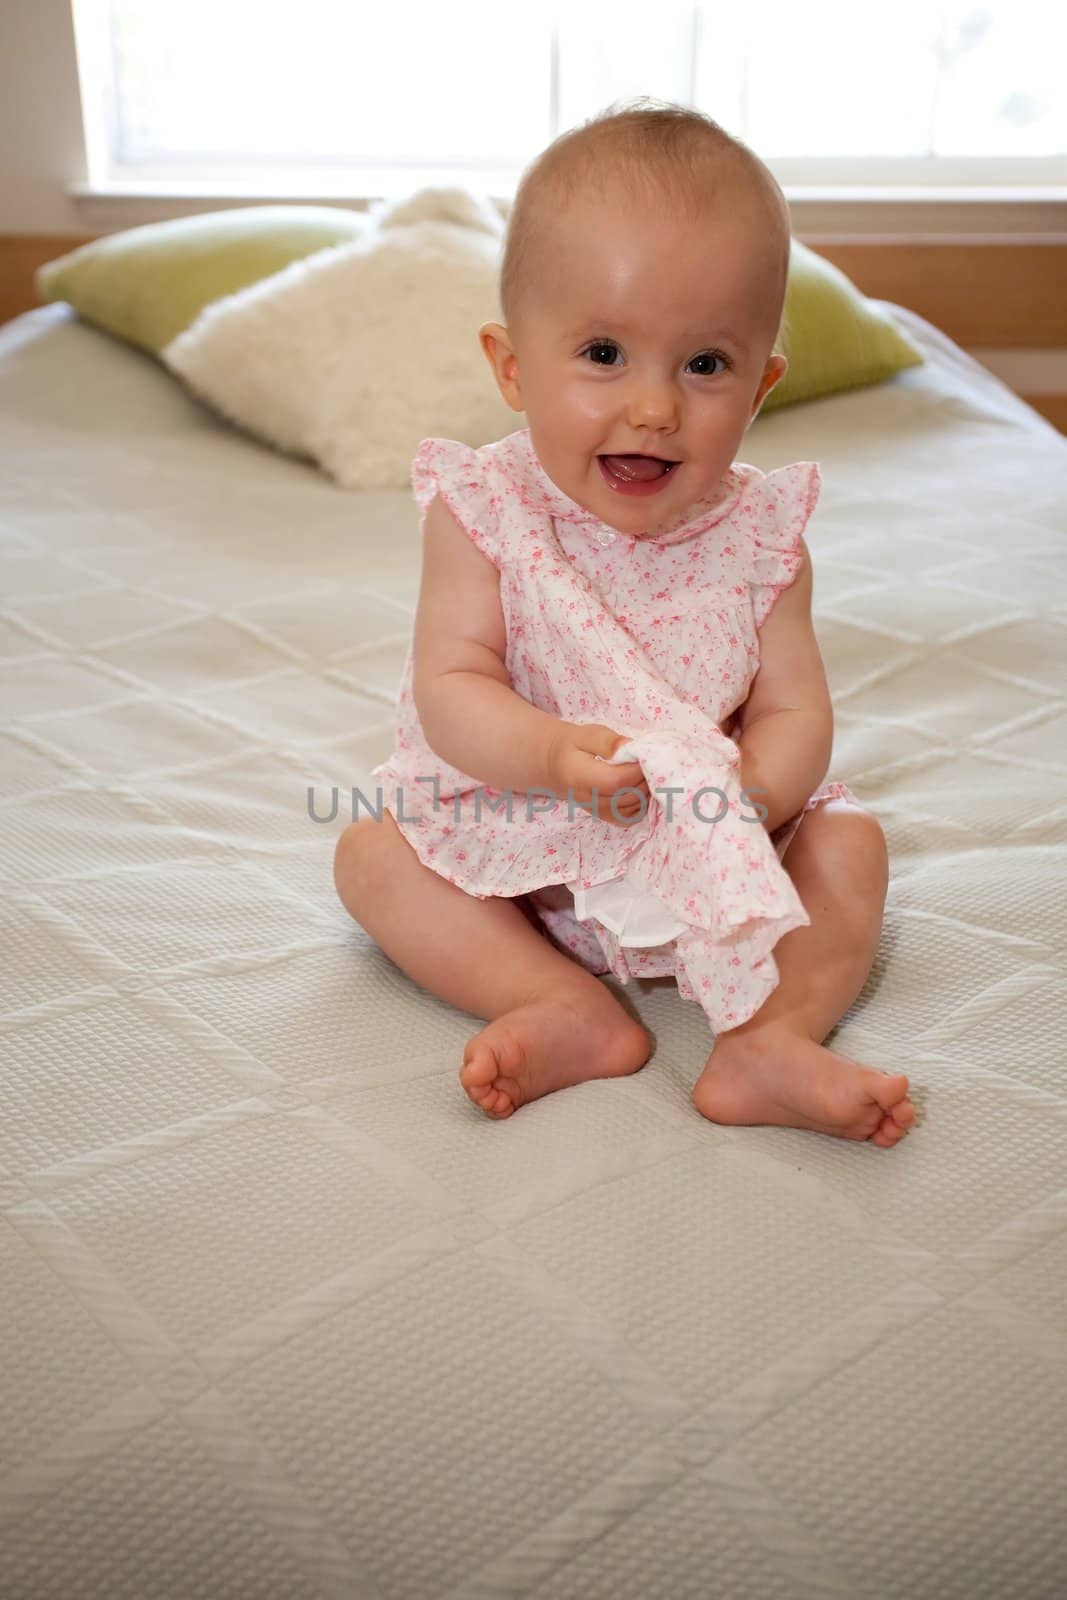 Cute little caucasian baby girl wearing pink dress and sitting on a bed.